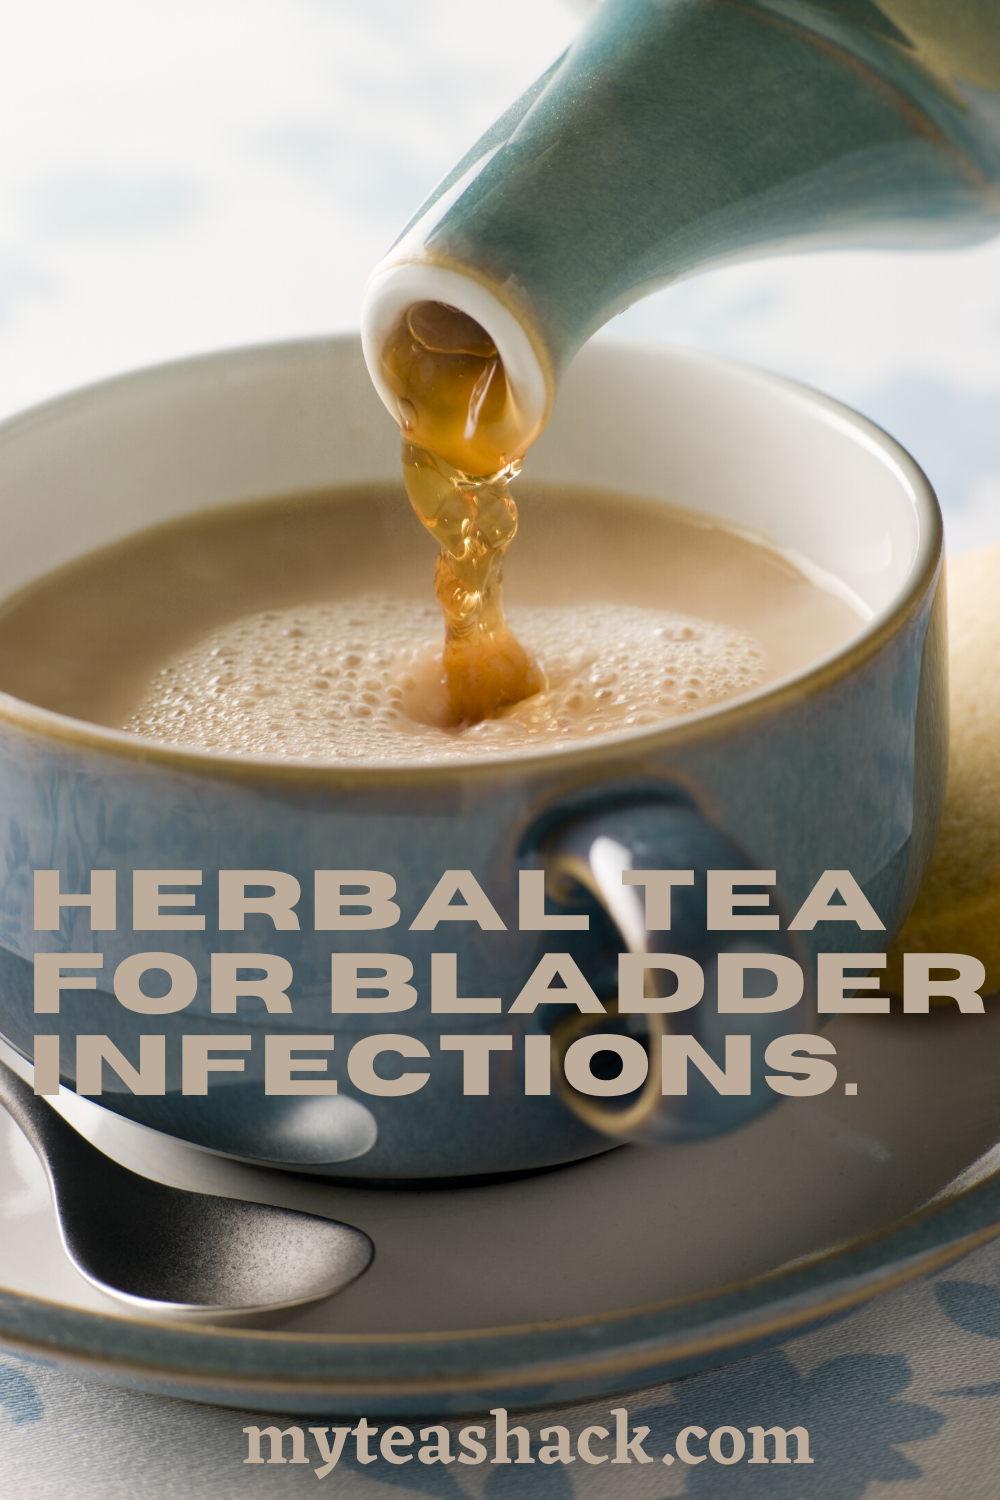 Herbal Tea for Bladder Infections.